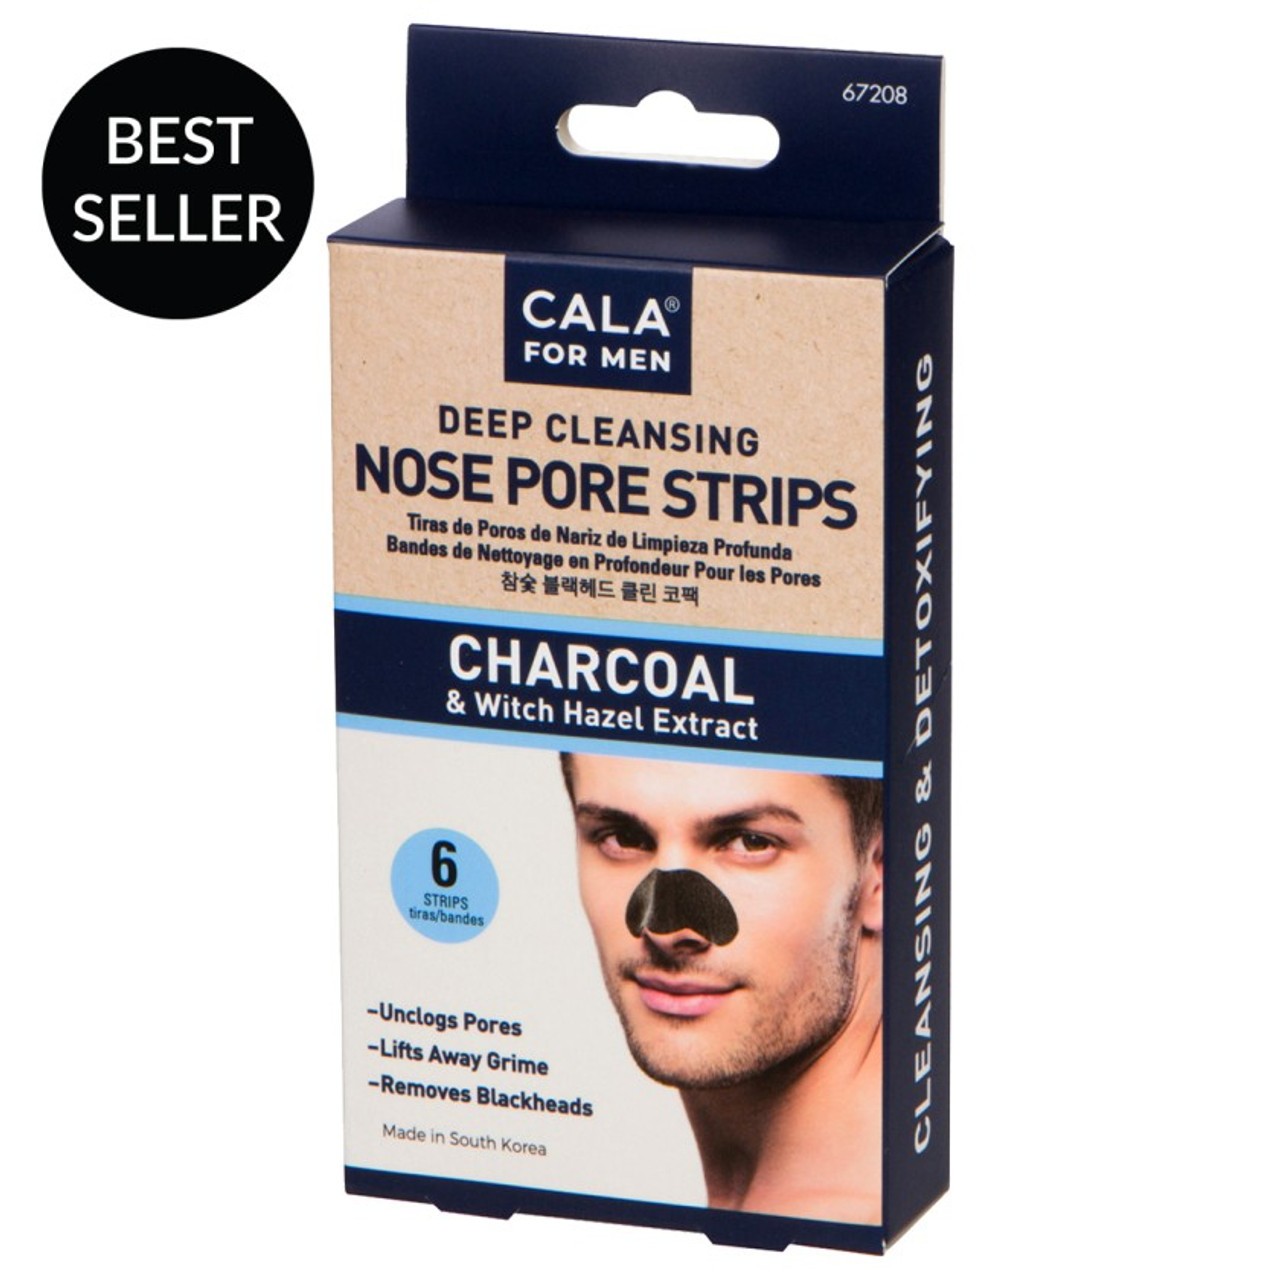 Cala For Men Deep Cleansing Charcoal Nose Strips, 6 pcs